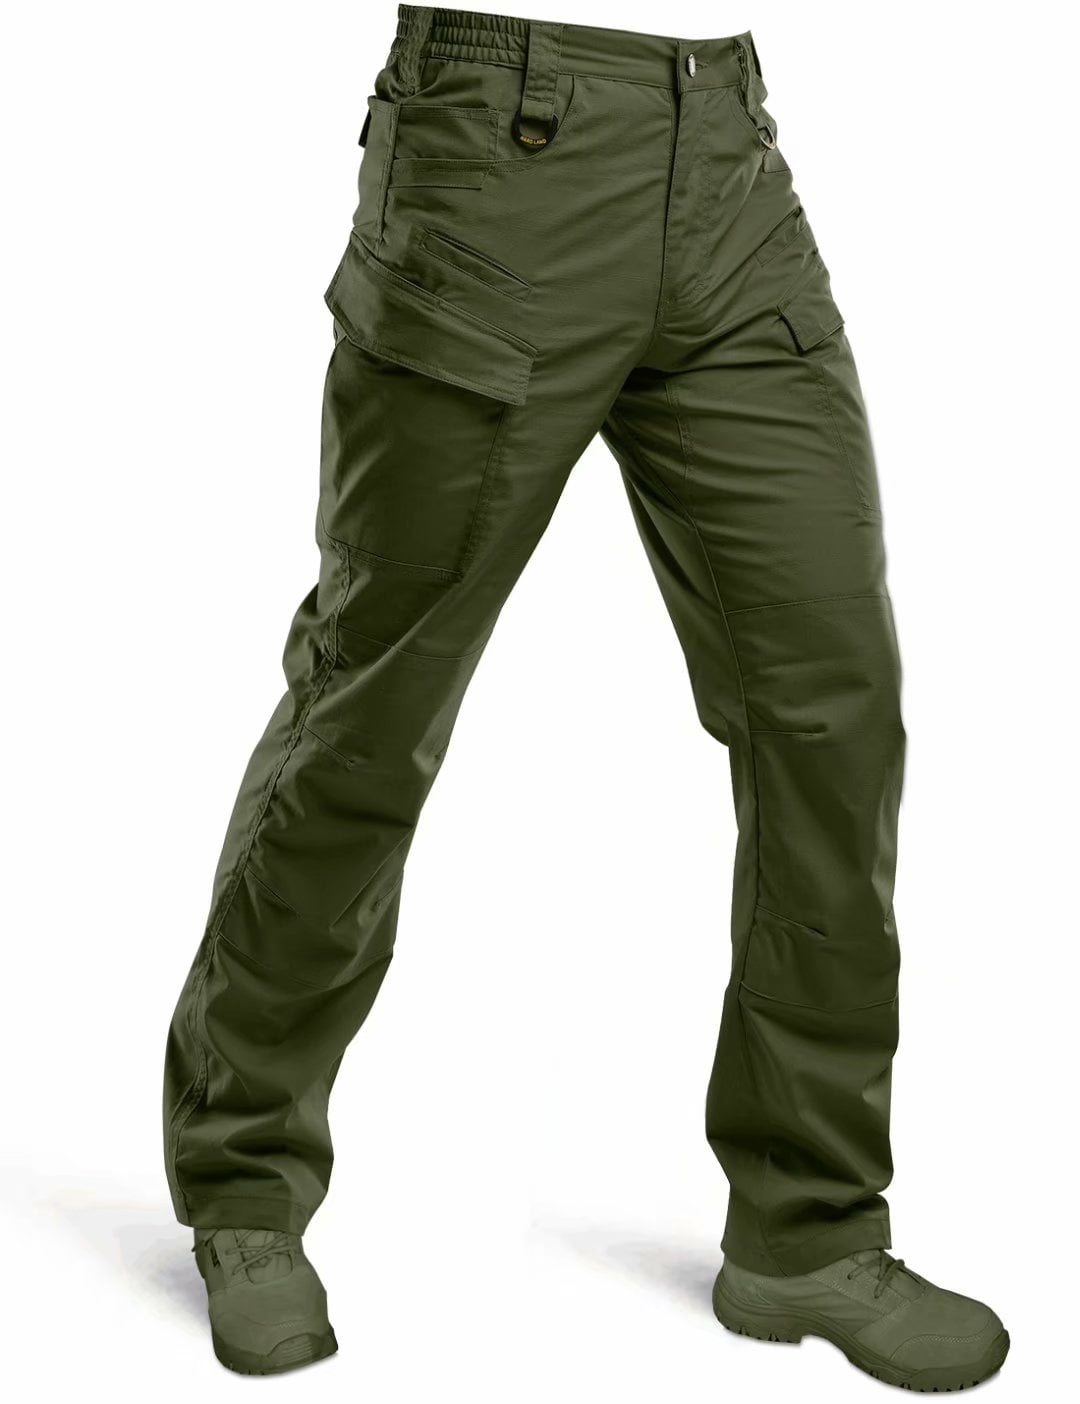 AKARMY Mens Ripstop Tactical Pants Lightweight EDC Hiking Work Trousers Outdoor Cargo Pants with Multi Pocket 